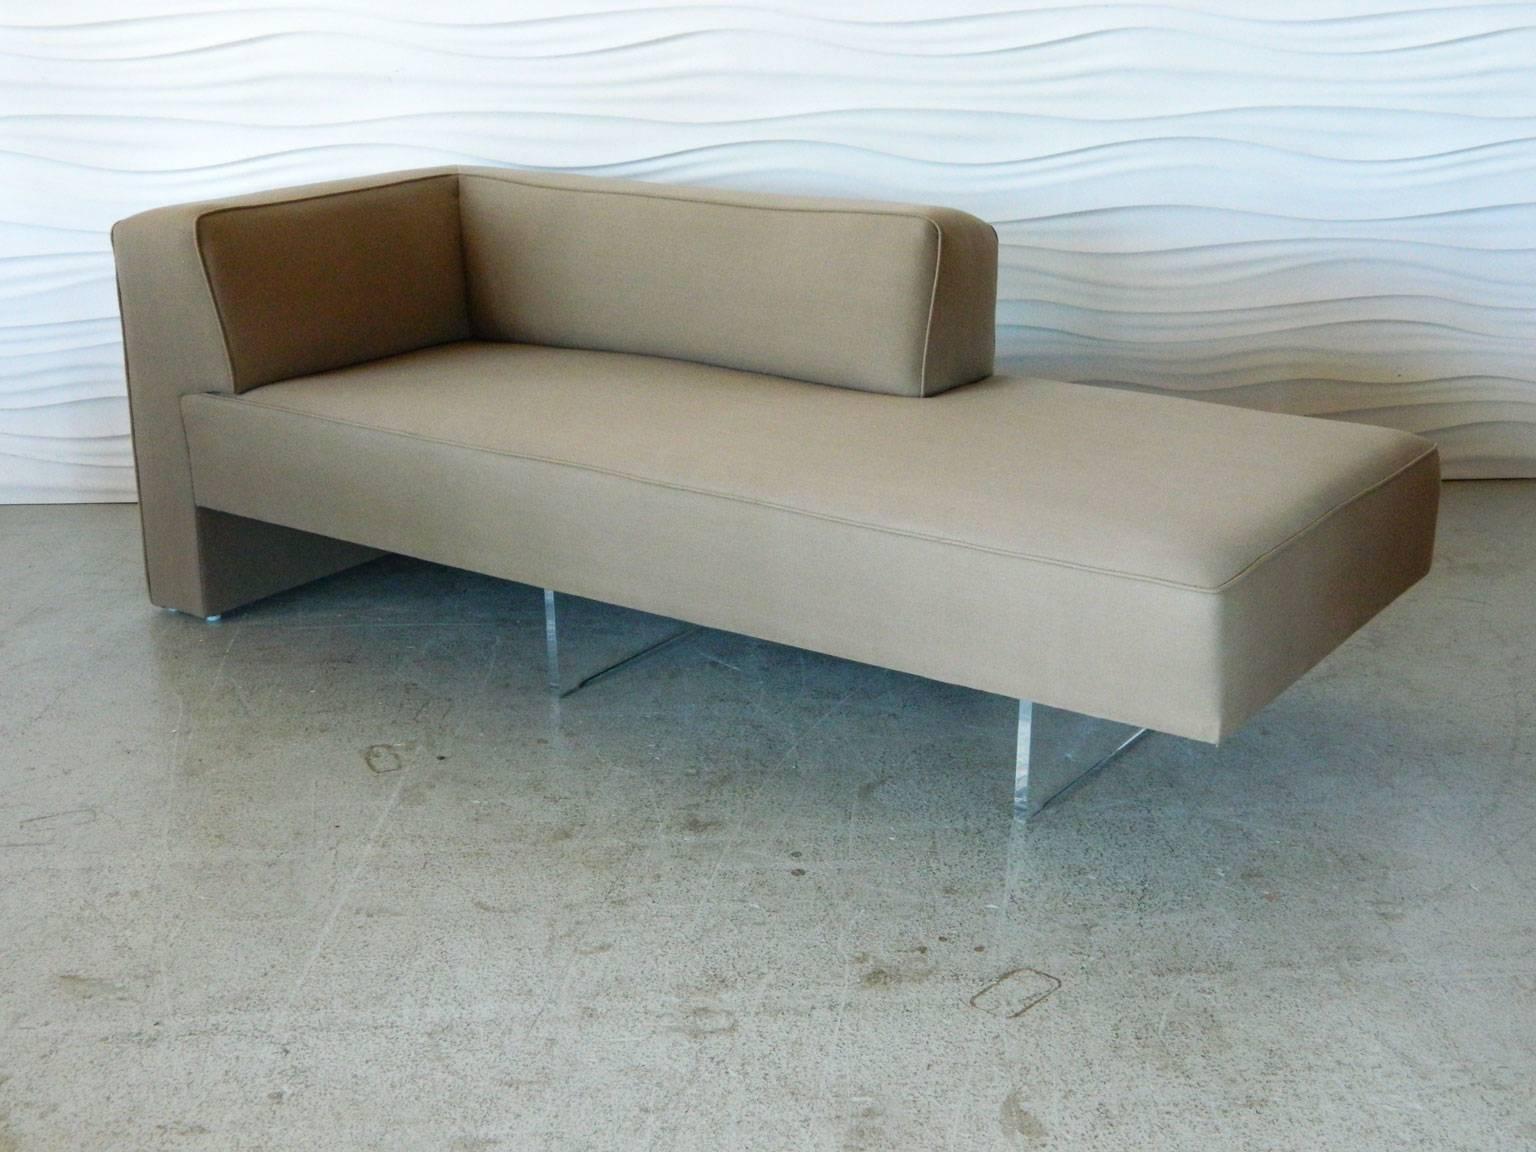 Designed by Vladimir Kagan in the 1970s, the Omnibus sectional sofa appears to float thanks to its Lucite base.

This sectional grouping includes:
1- corner sofa (80 inches long, 33 inches deep, 28 inches high; seat height 17 inches)
2- slipper